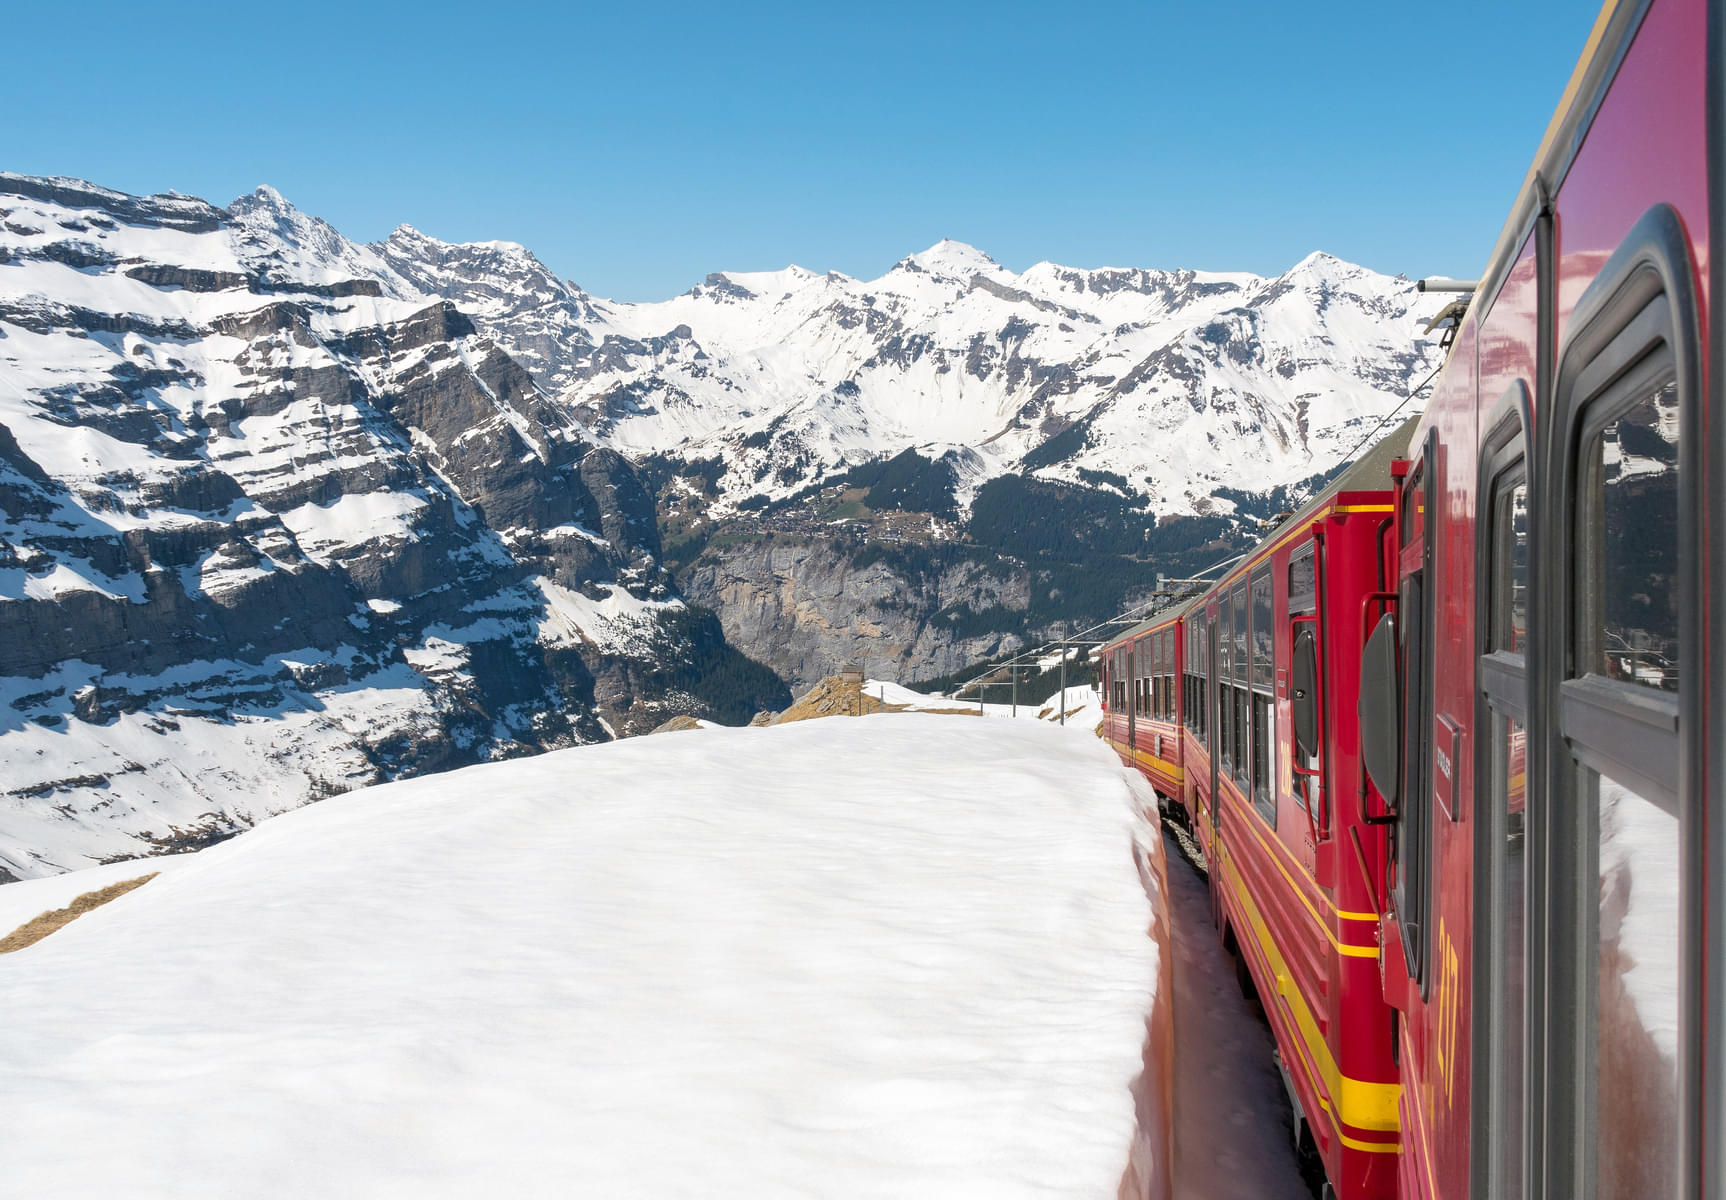 See the scenic vistas of majestic mountains during the cogwheel train journey